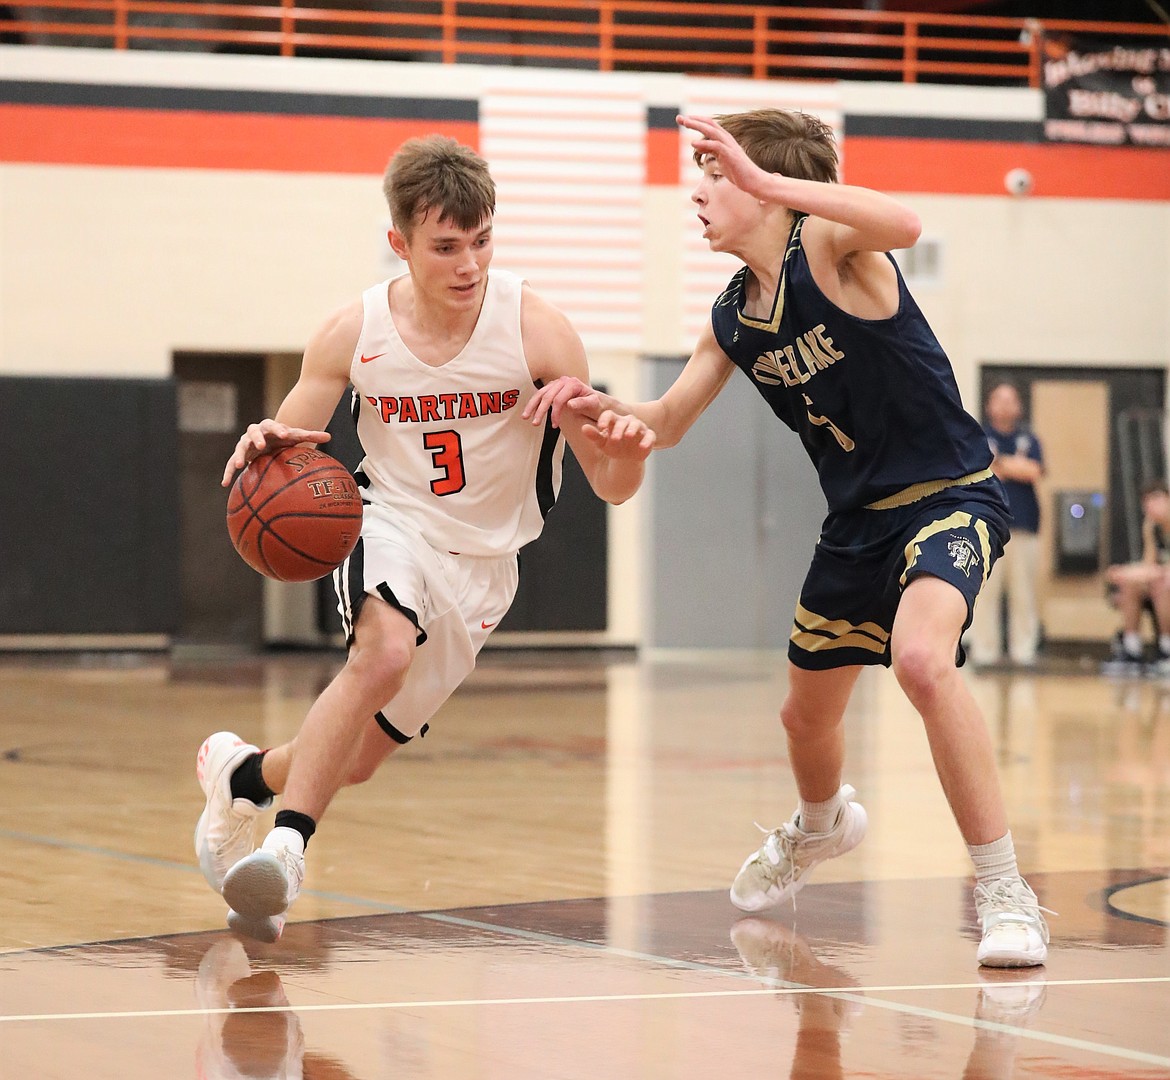 Priest River junior Jordan Nortz was named a finalist for the North Idaho Athletic Hall of Fame 3A-1A Male High School Athlete of the Year award.